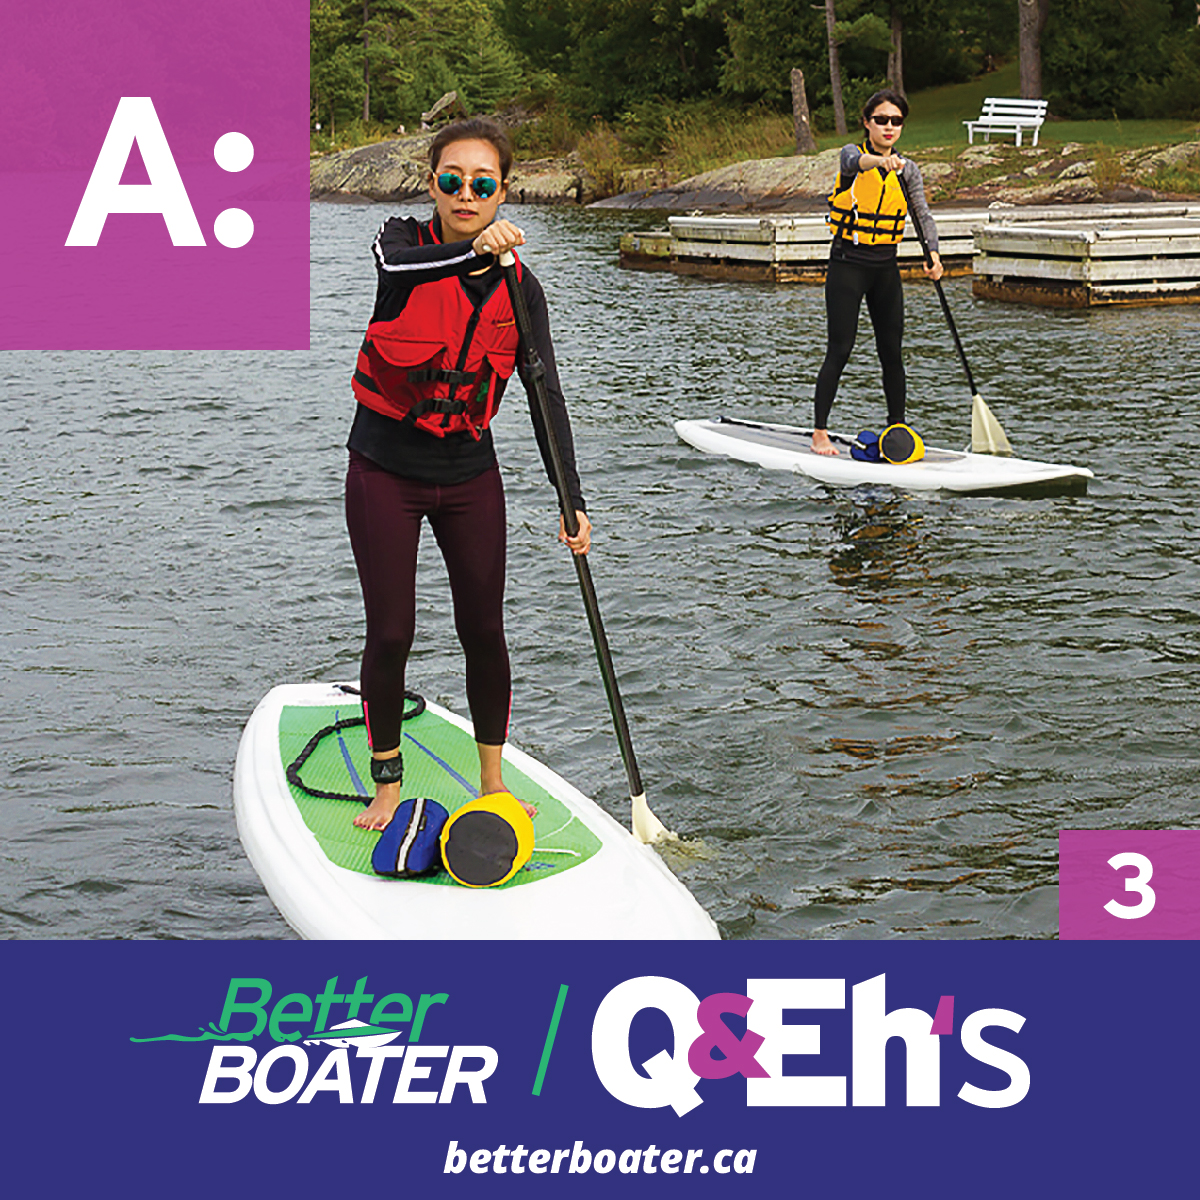 https://betterboater.ca/Q&Eh:%20SUP%20Impared